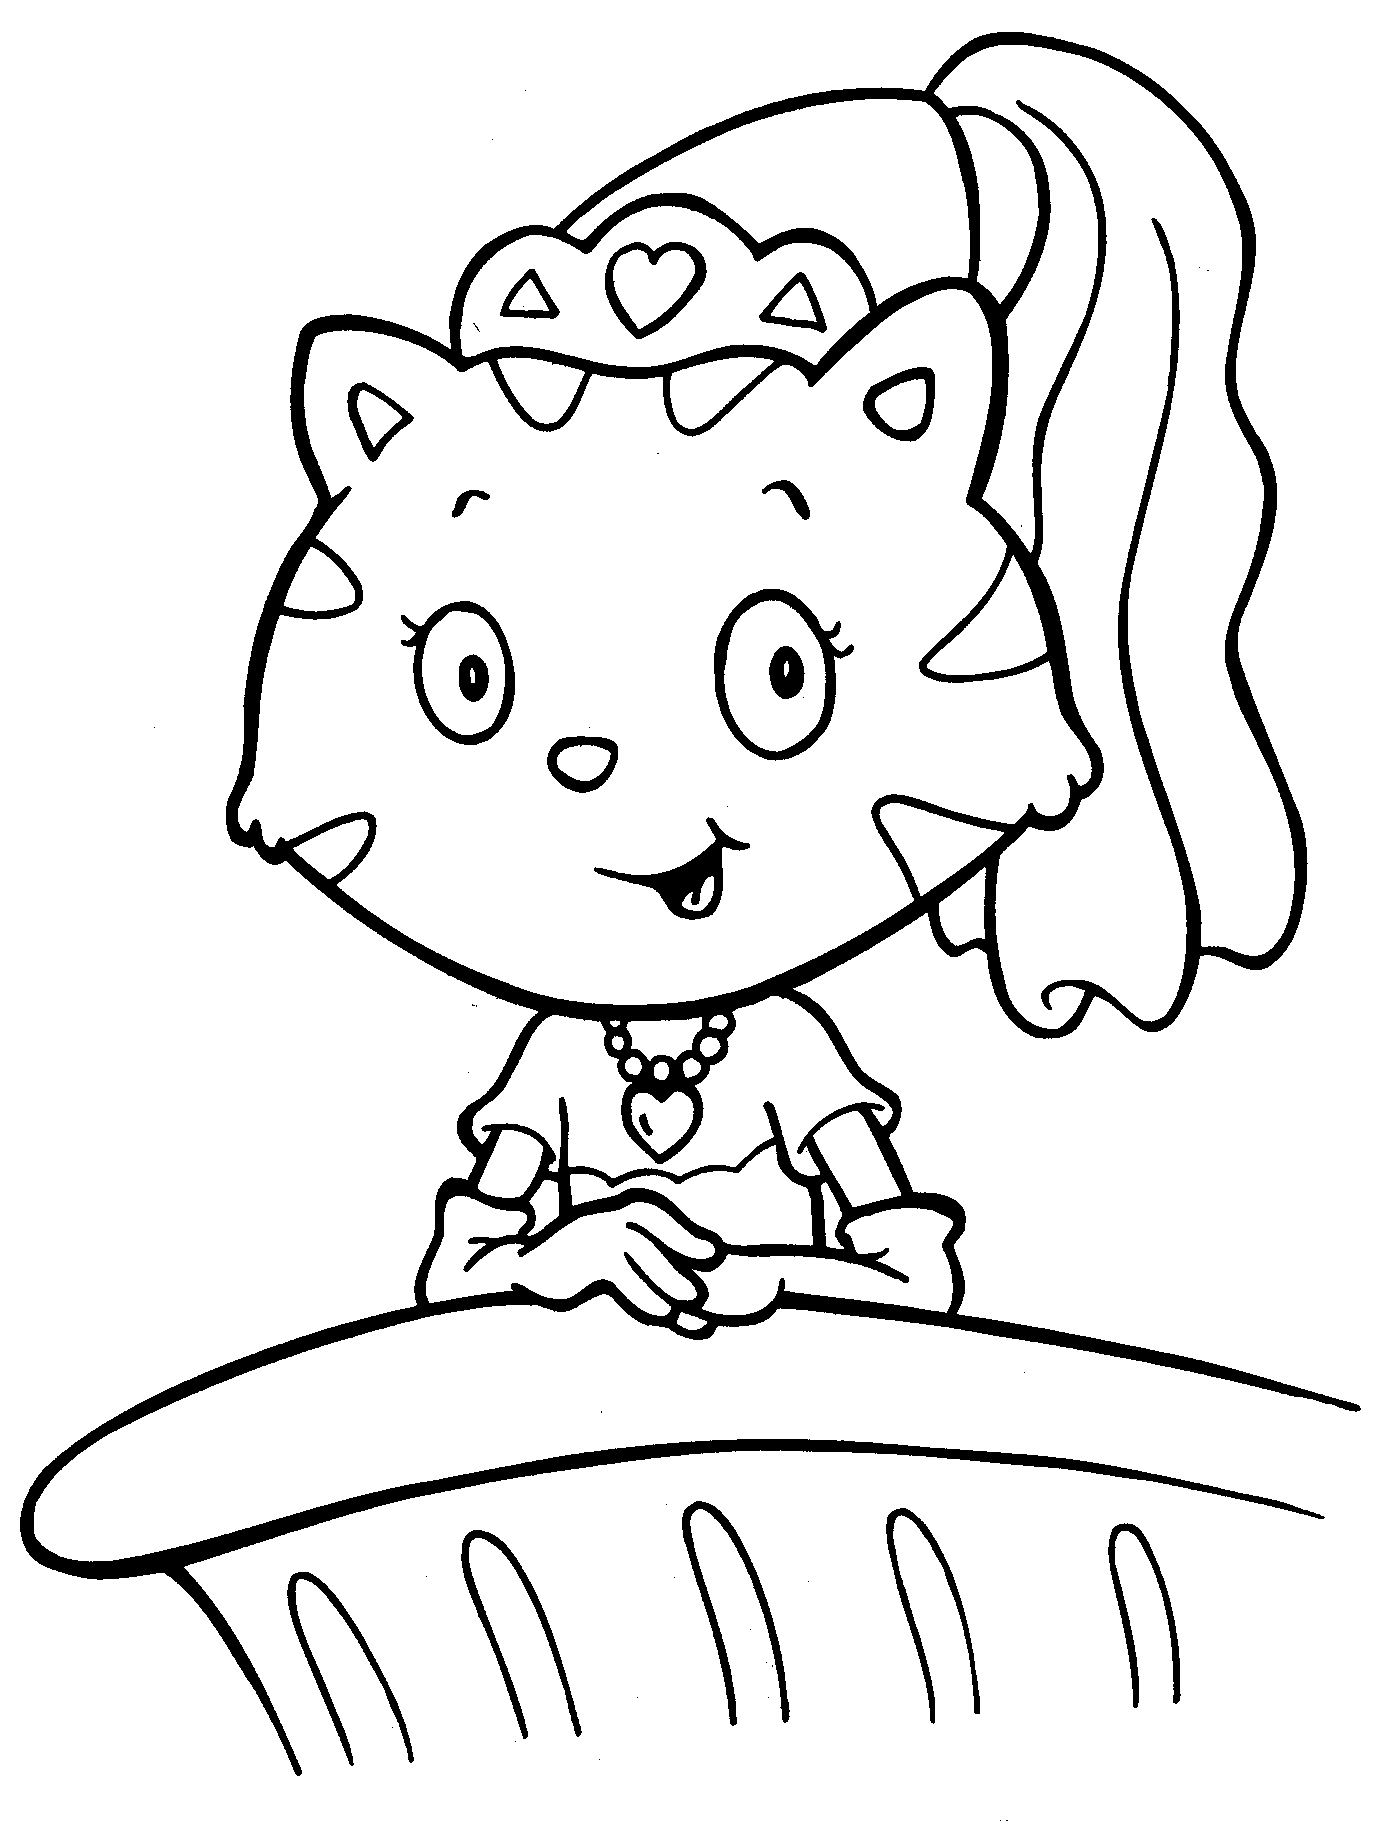 colouring pictures cats kittens kitten coloring pages best coloring pages for kids colouring pictures cats kittens 1 1